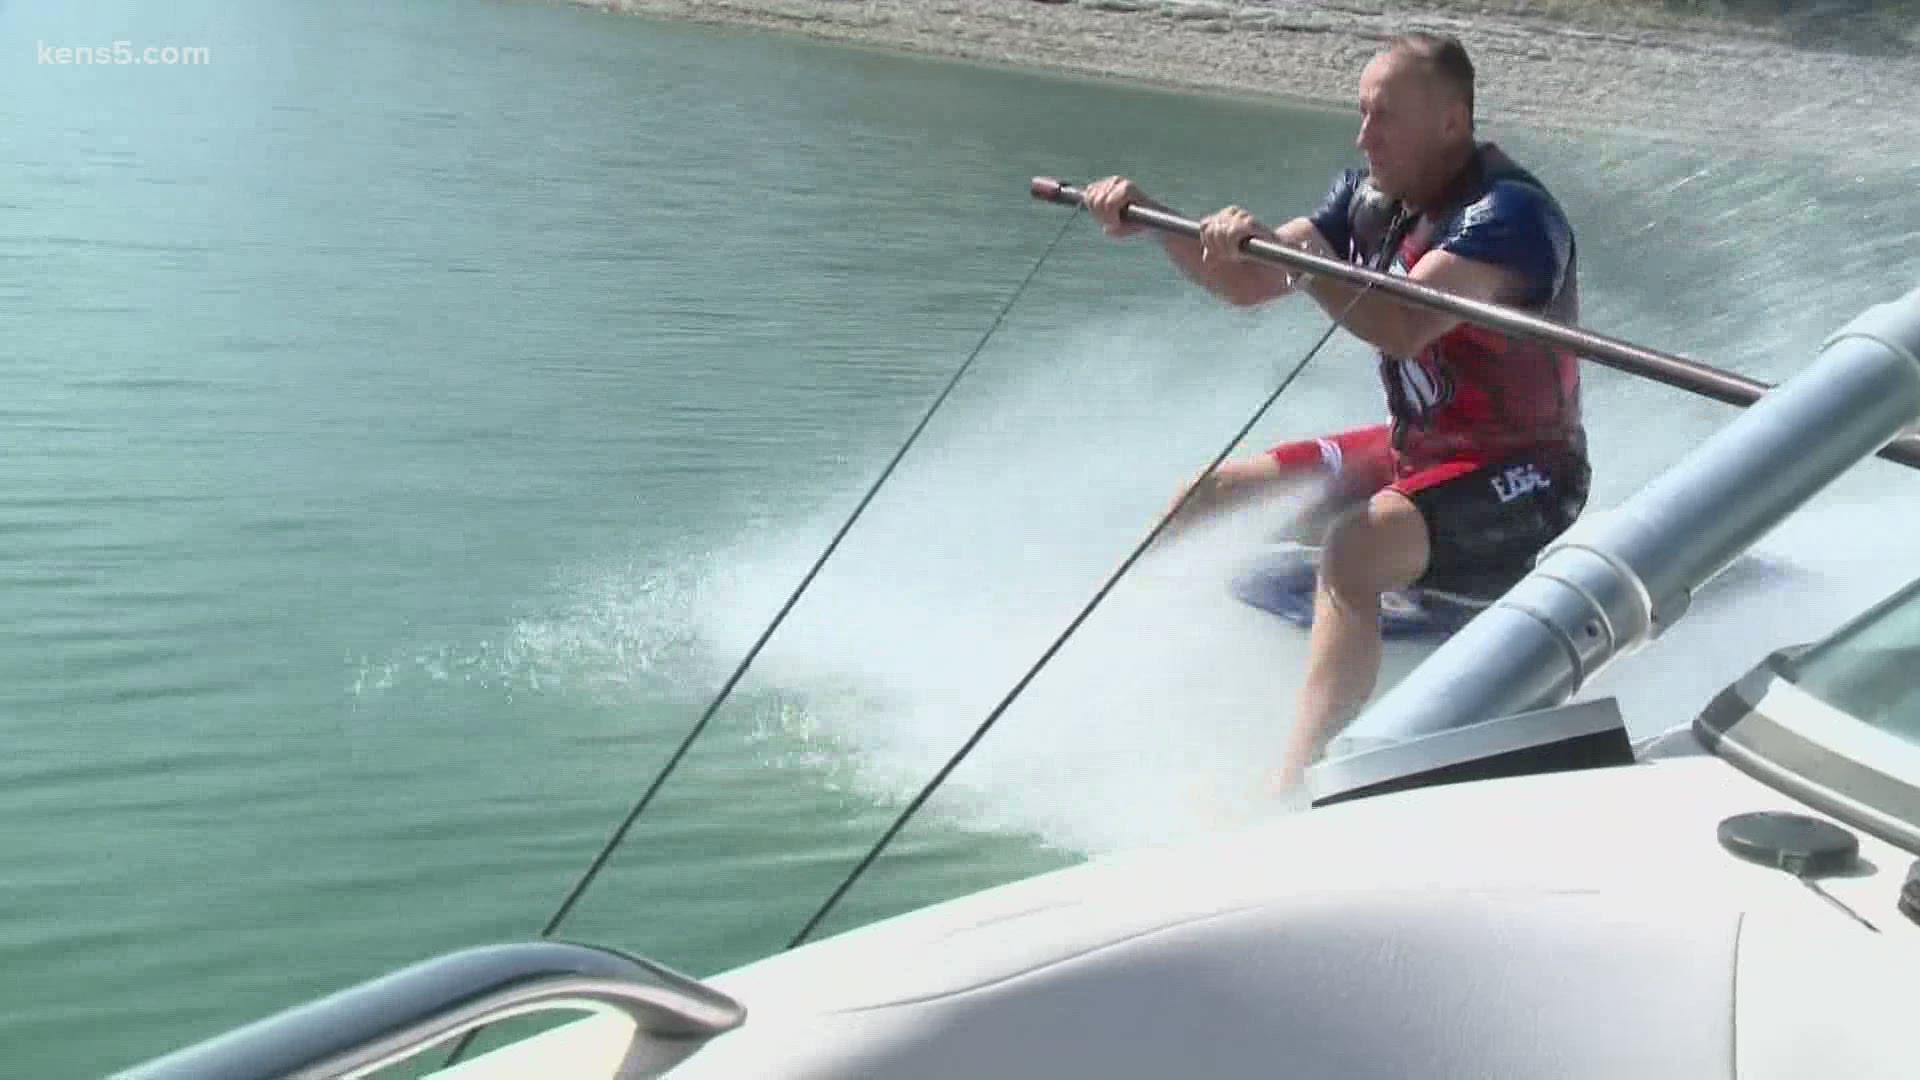 In this week's Texas Outdoors, we're heading to Medina Lake for something really tough... barefoot water skiing.